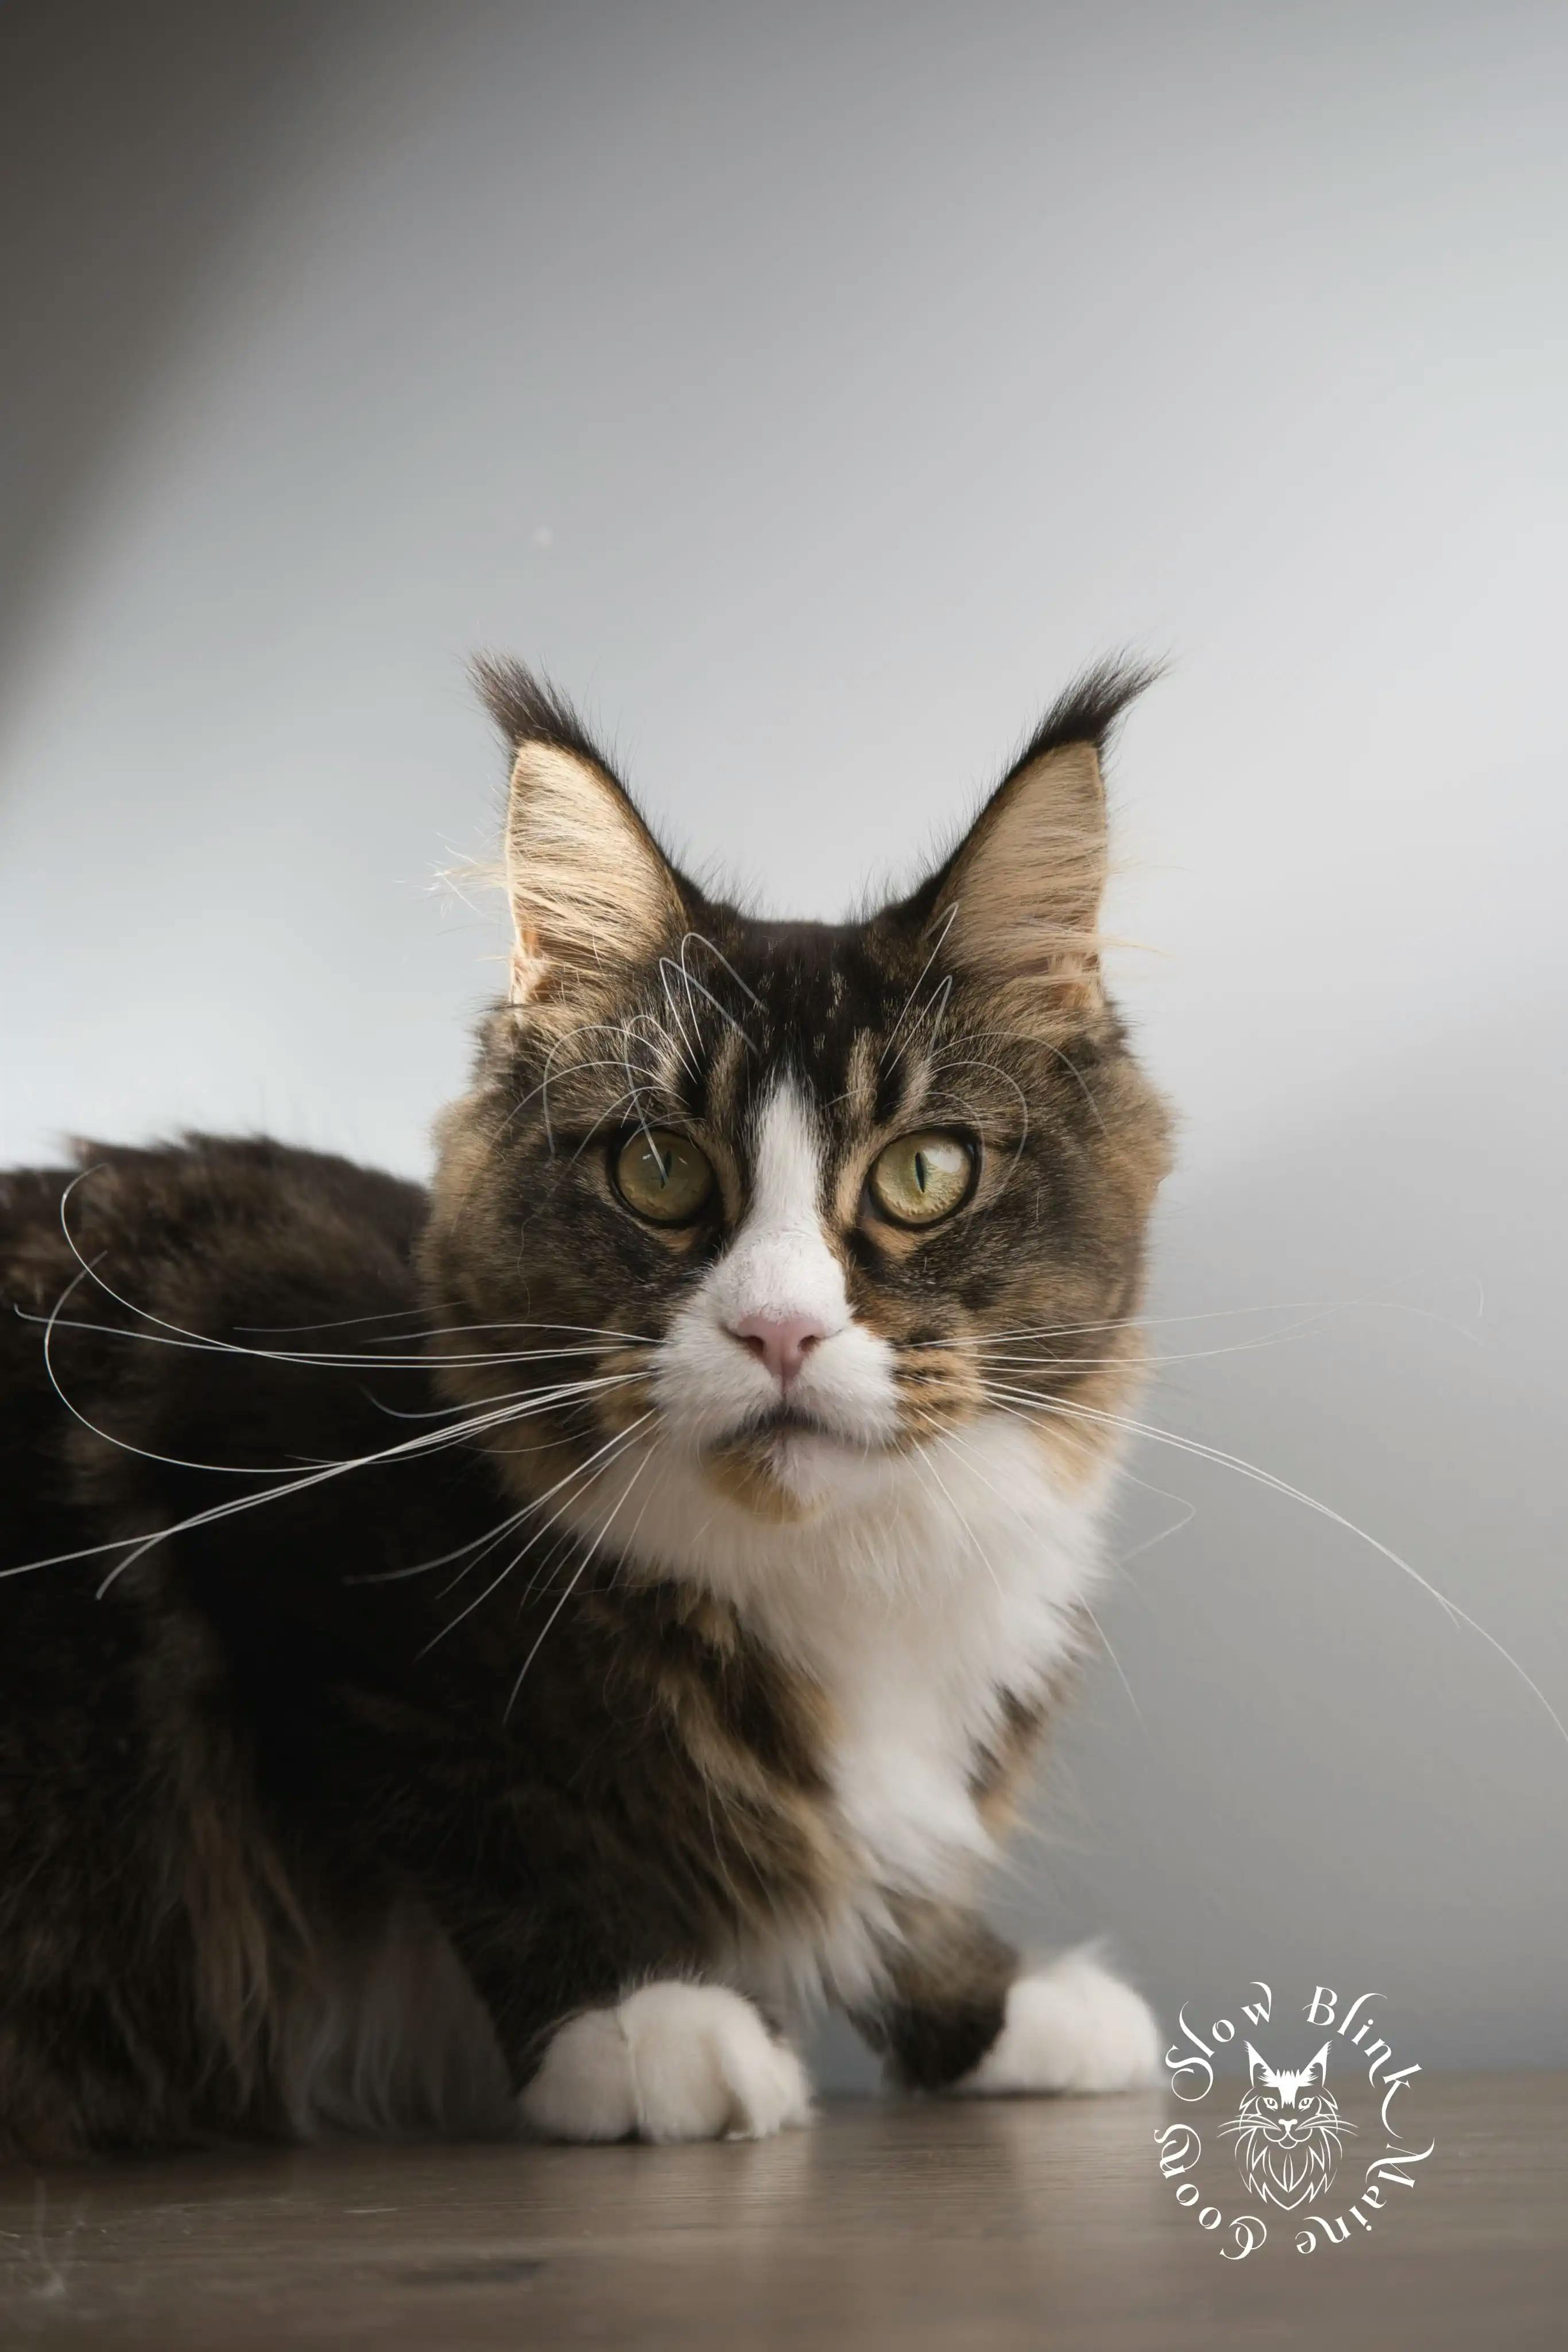 Adult Maine Coon Cat from SlowBlinkMaineCoons > calypso blaze | black ticked tabby bicolor | maine coon | ems code n 25 03 | 6 months old | 2